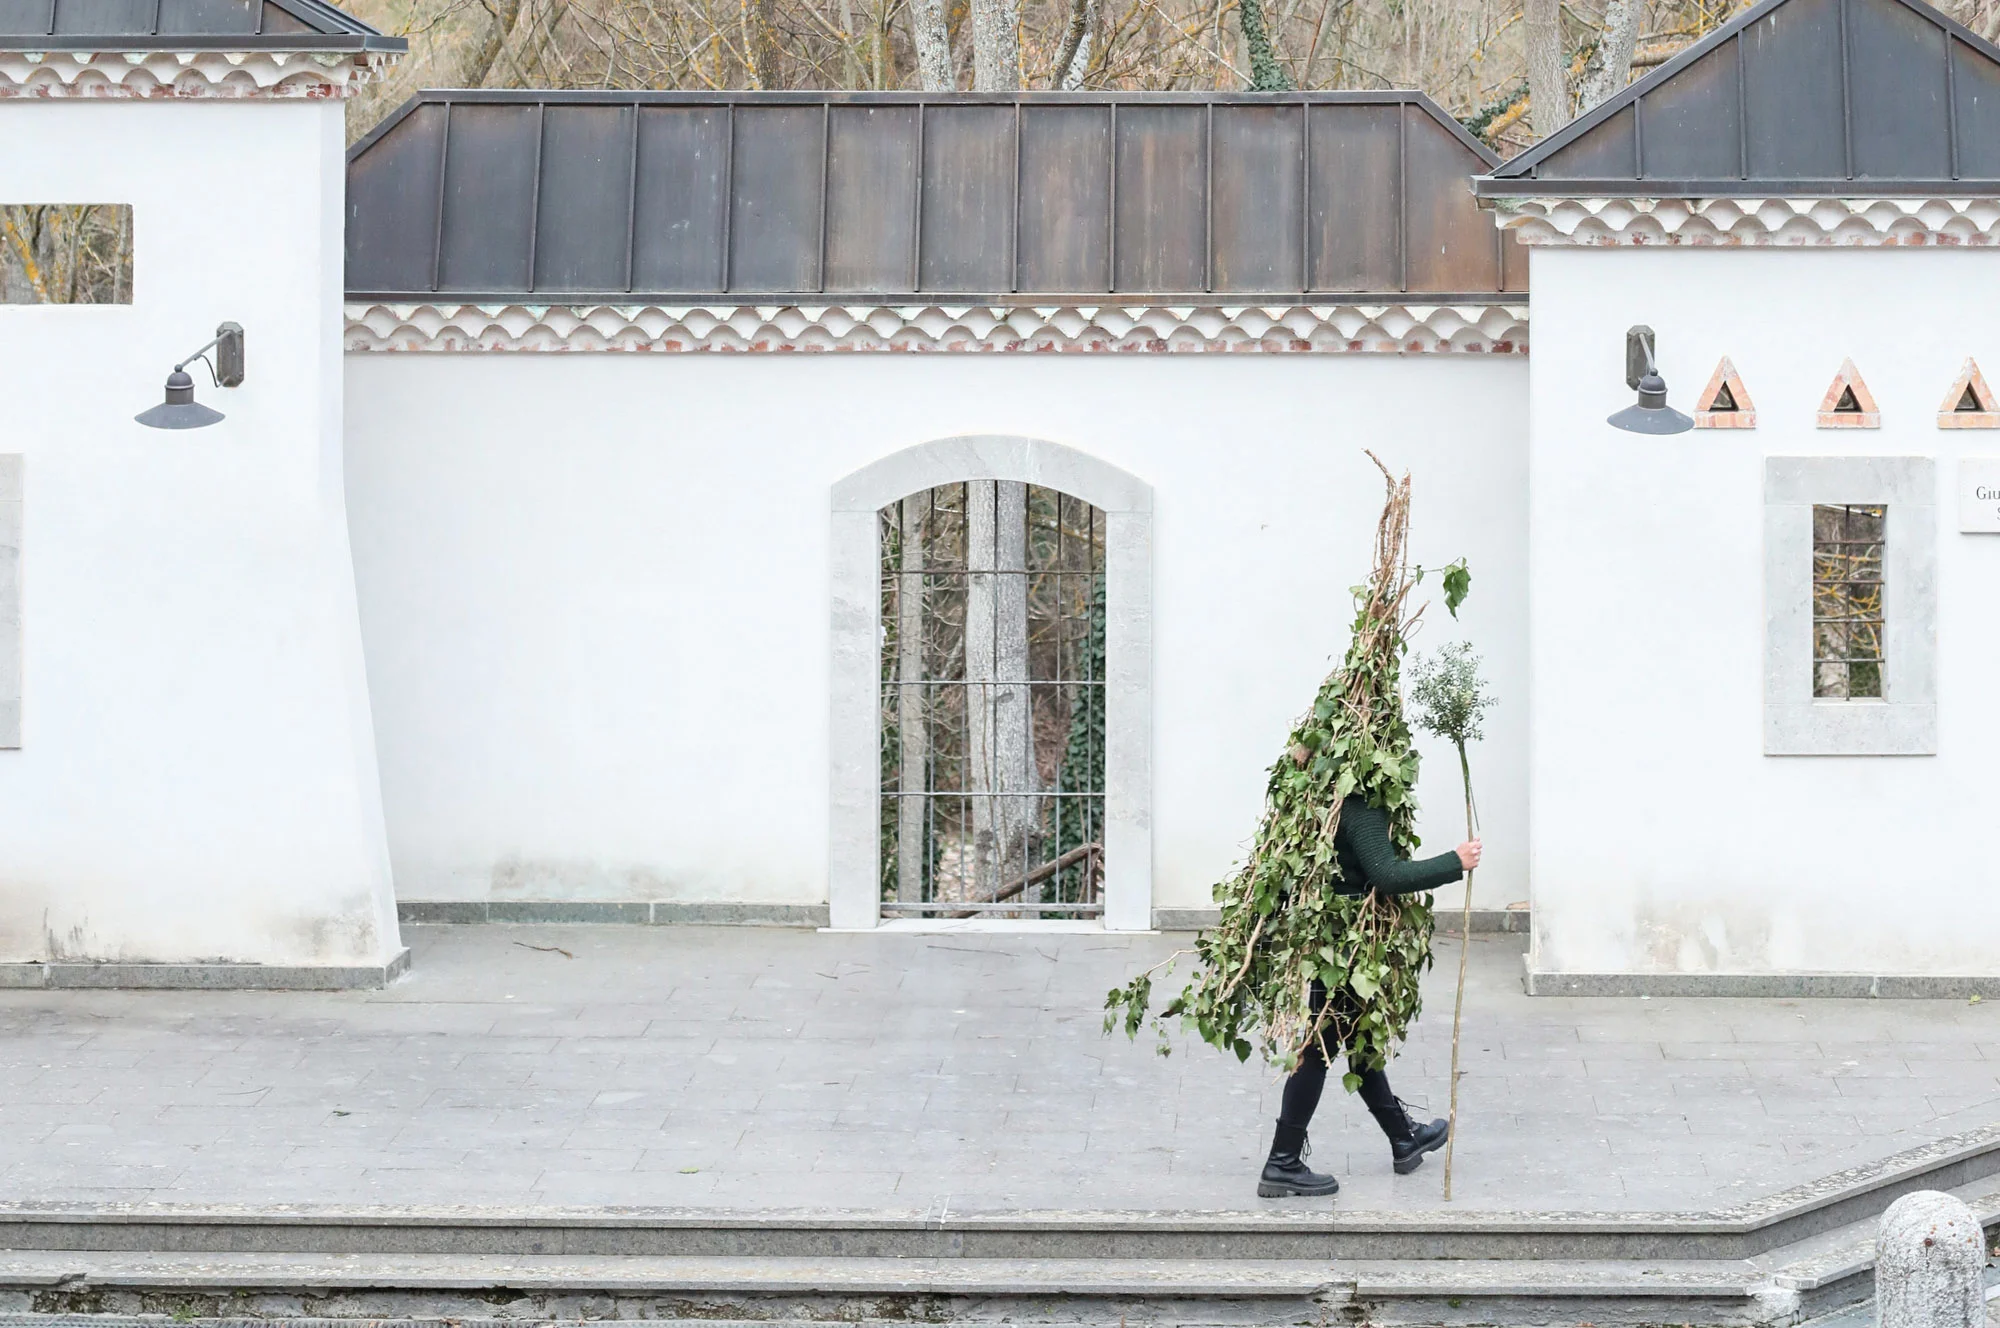 A photograph of a man walking while wearing a “Rumita” outfit (made from tree branches) through the streets of Satriano, Italy.